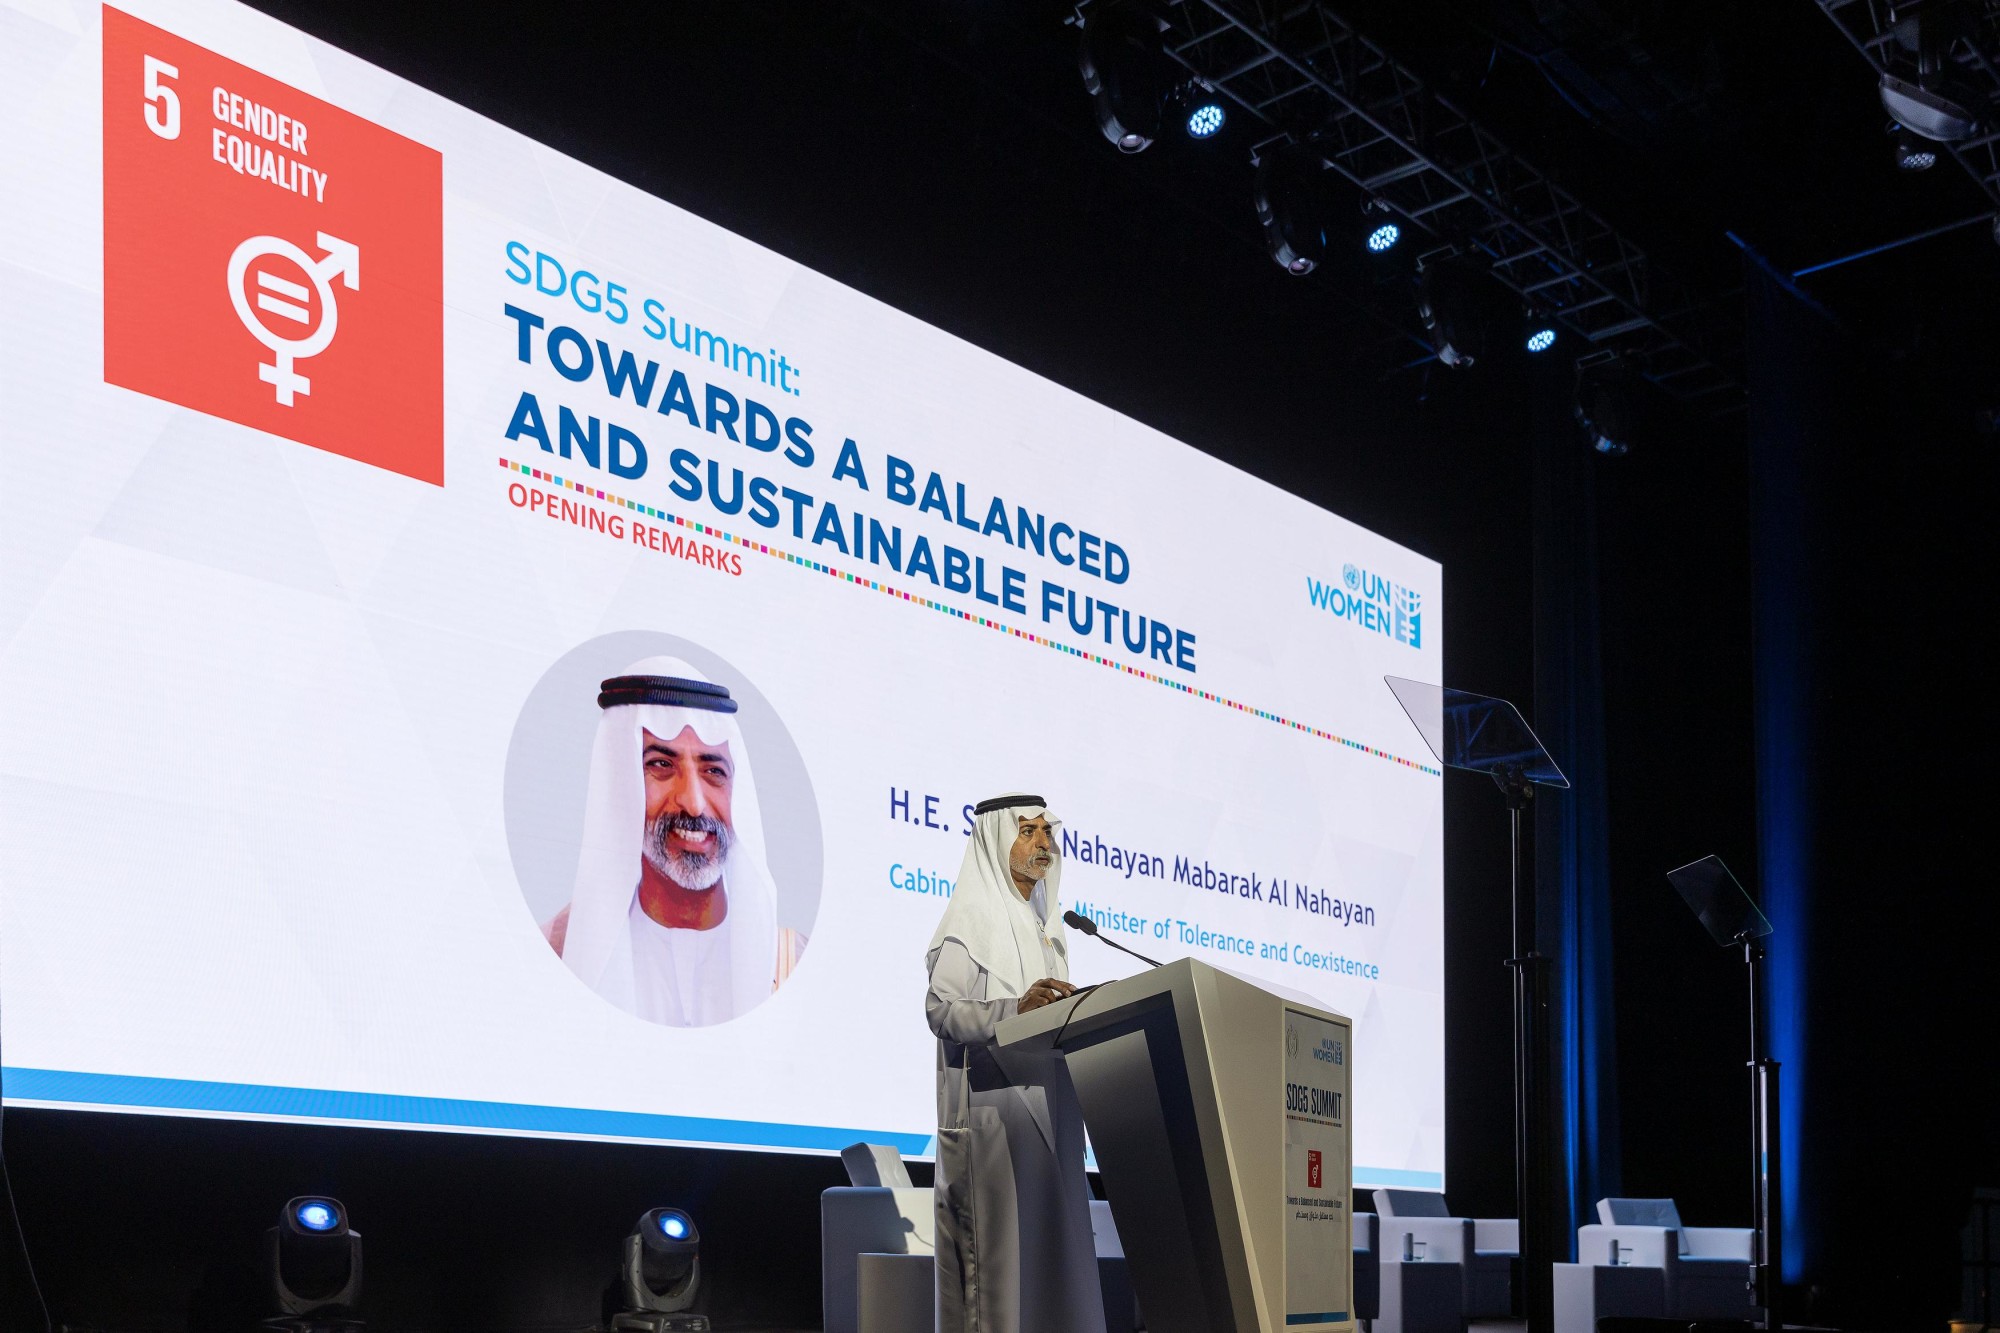 His Excellency Sheikh Nahayan Mabarak Al Nahayan, UAE Minister of Tolerance and Coexistence Commissioner General of Expo 2020 Dubai speaks during the UN Women SDG 5 Summit at Dubai Exhibition Centre m60765